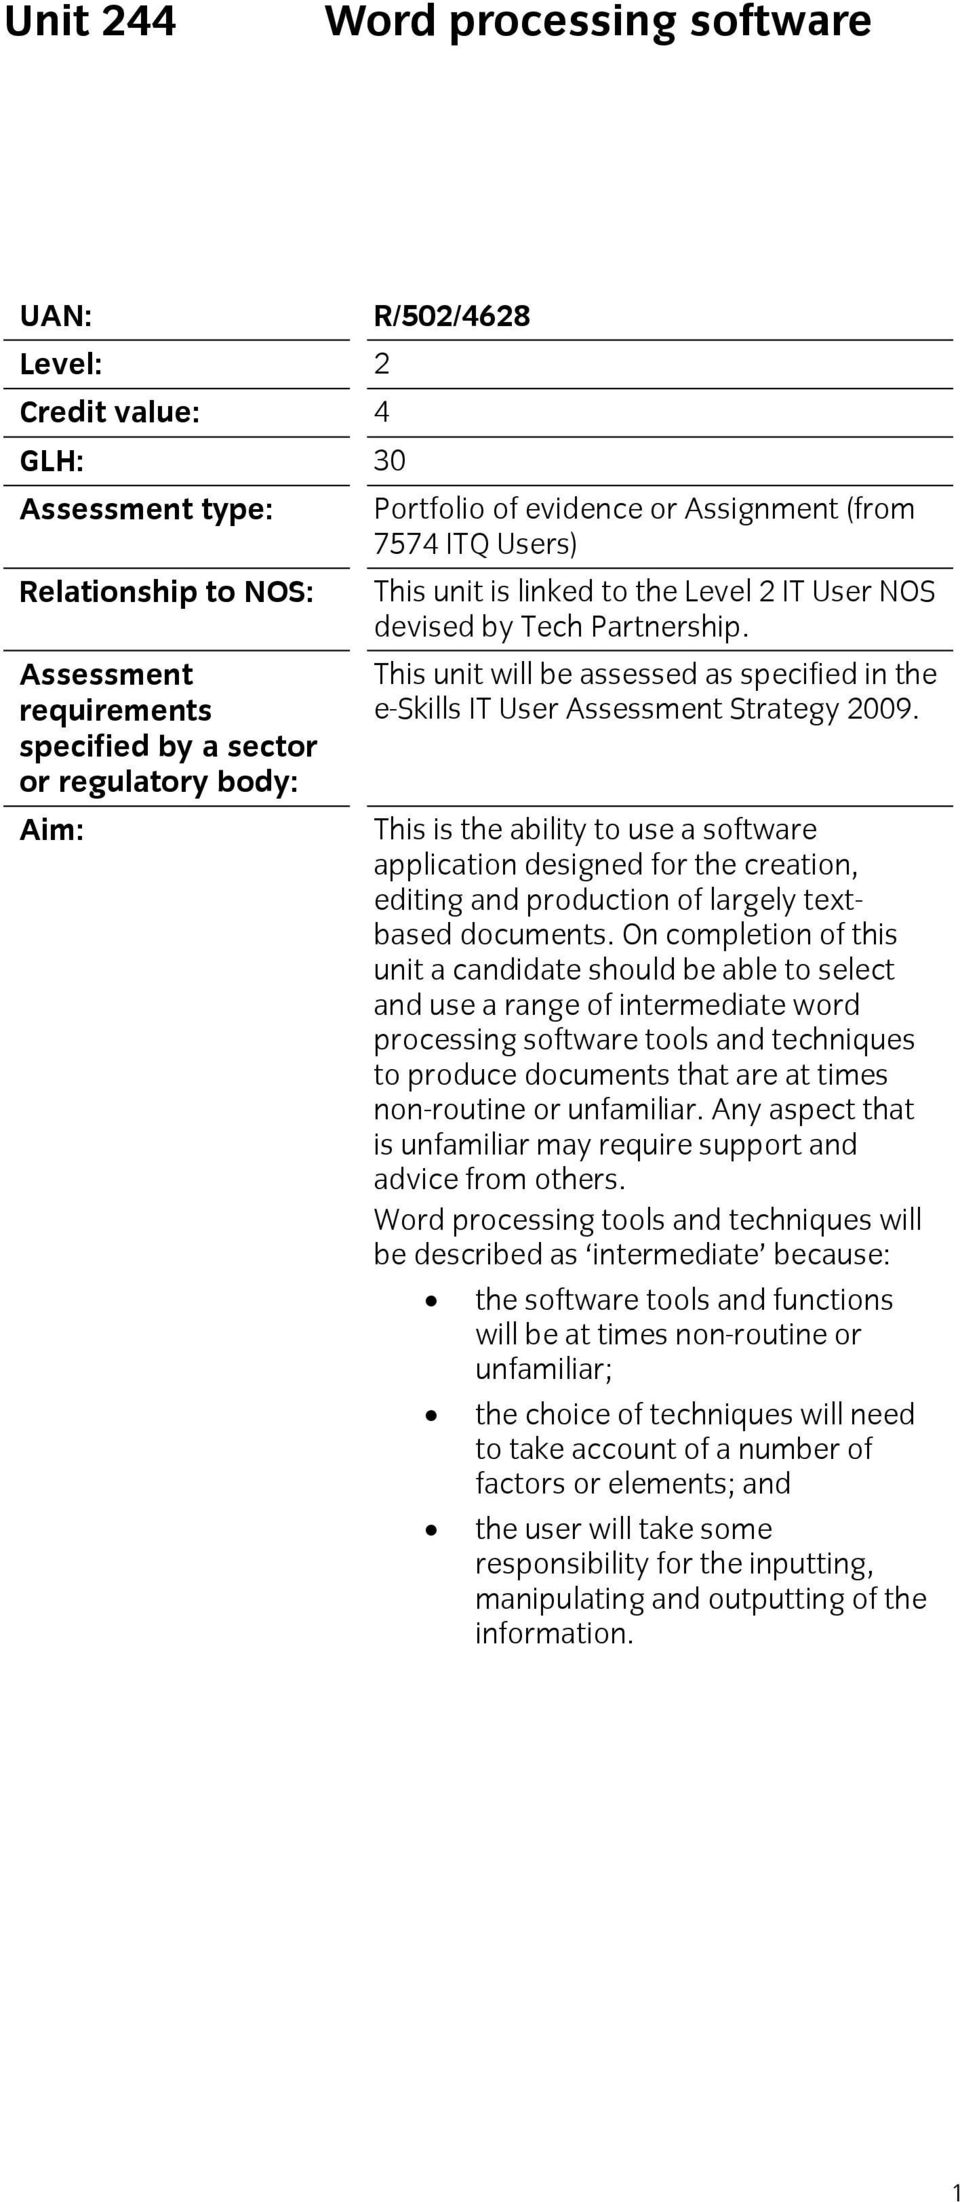 This unit will be assessed as specified in the e-skills IT User Assessment Strategy 2009.